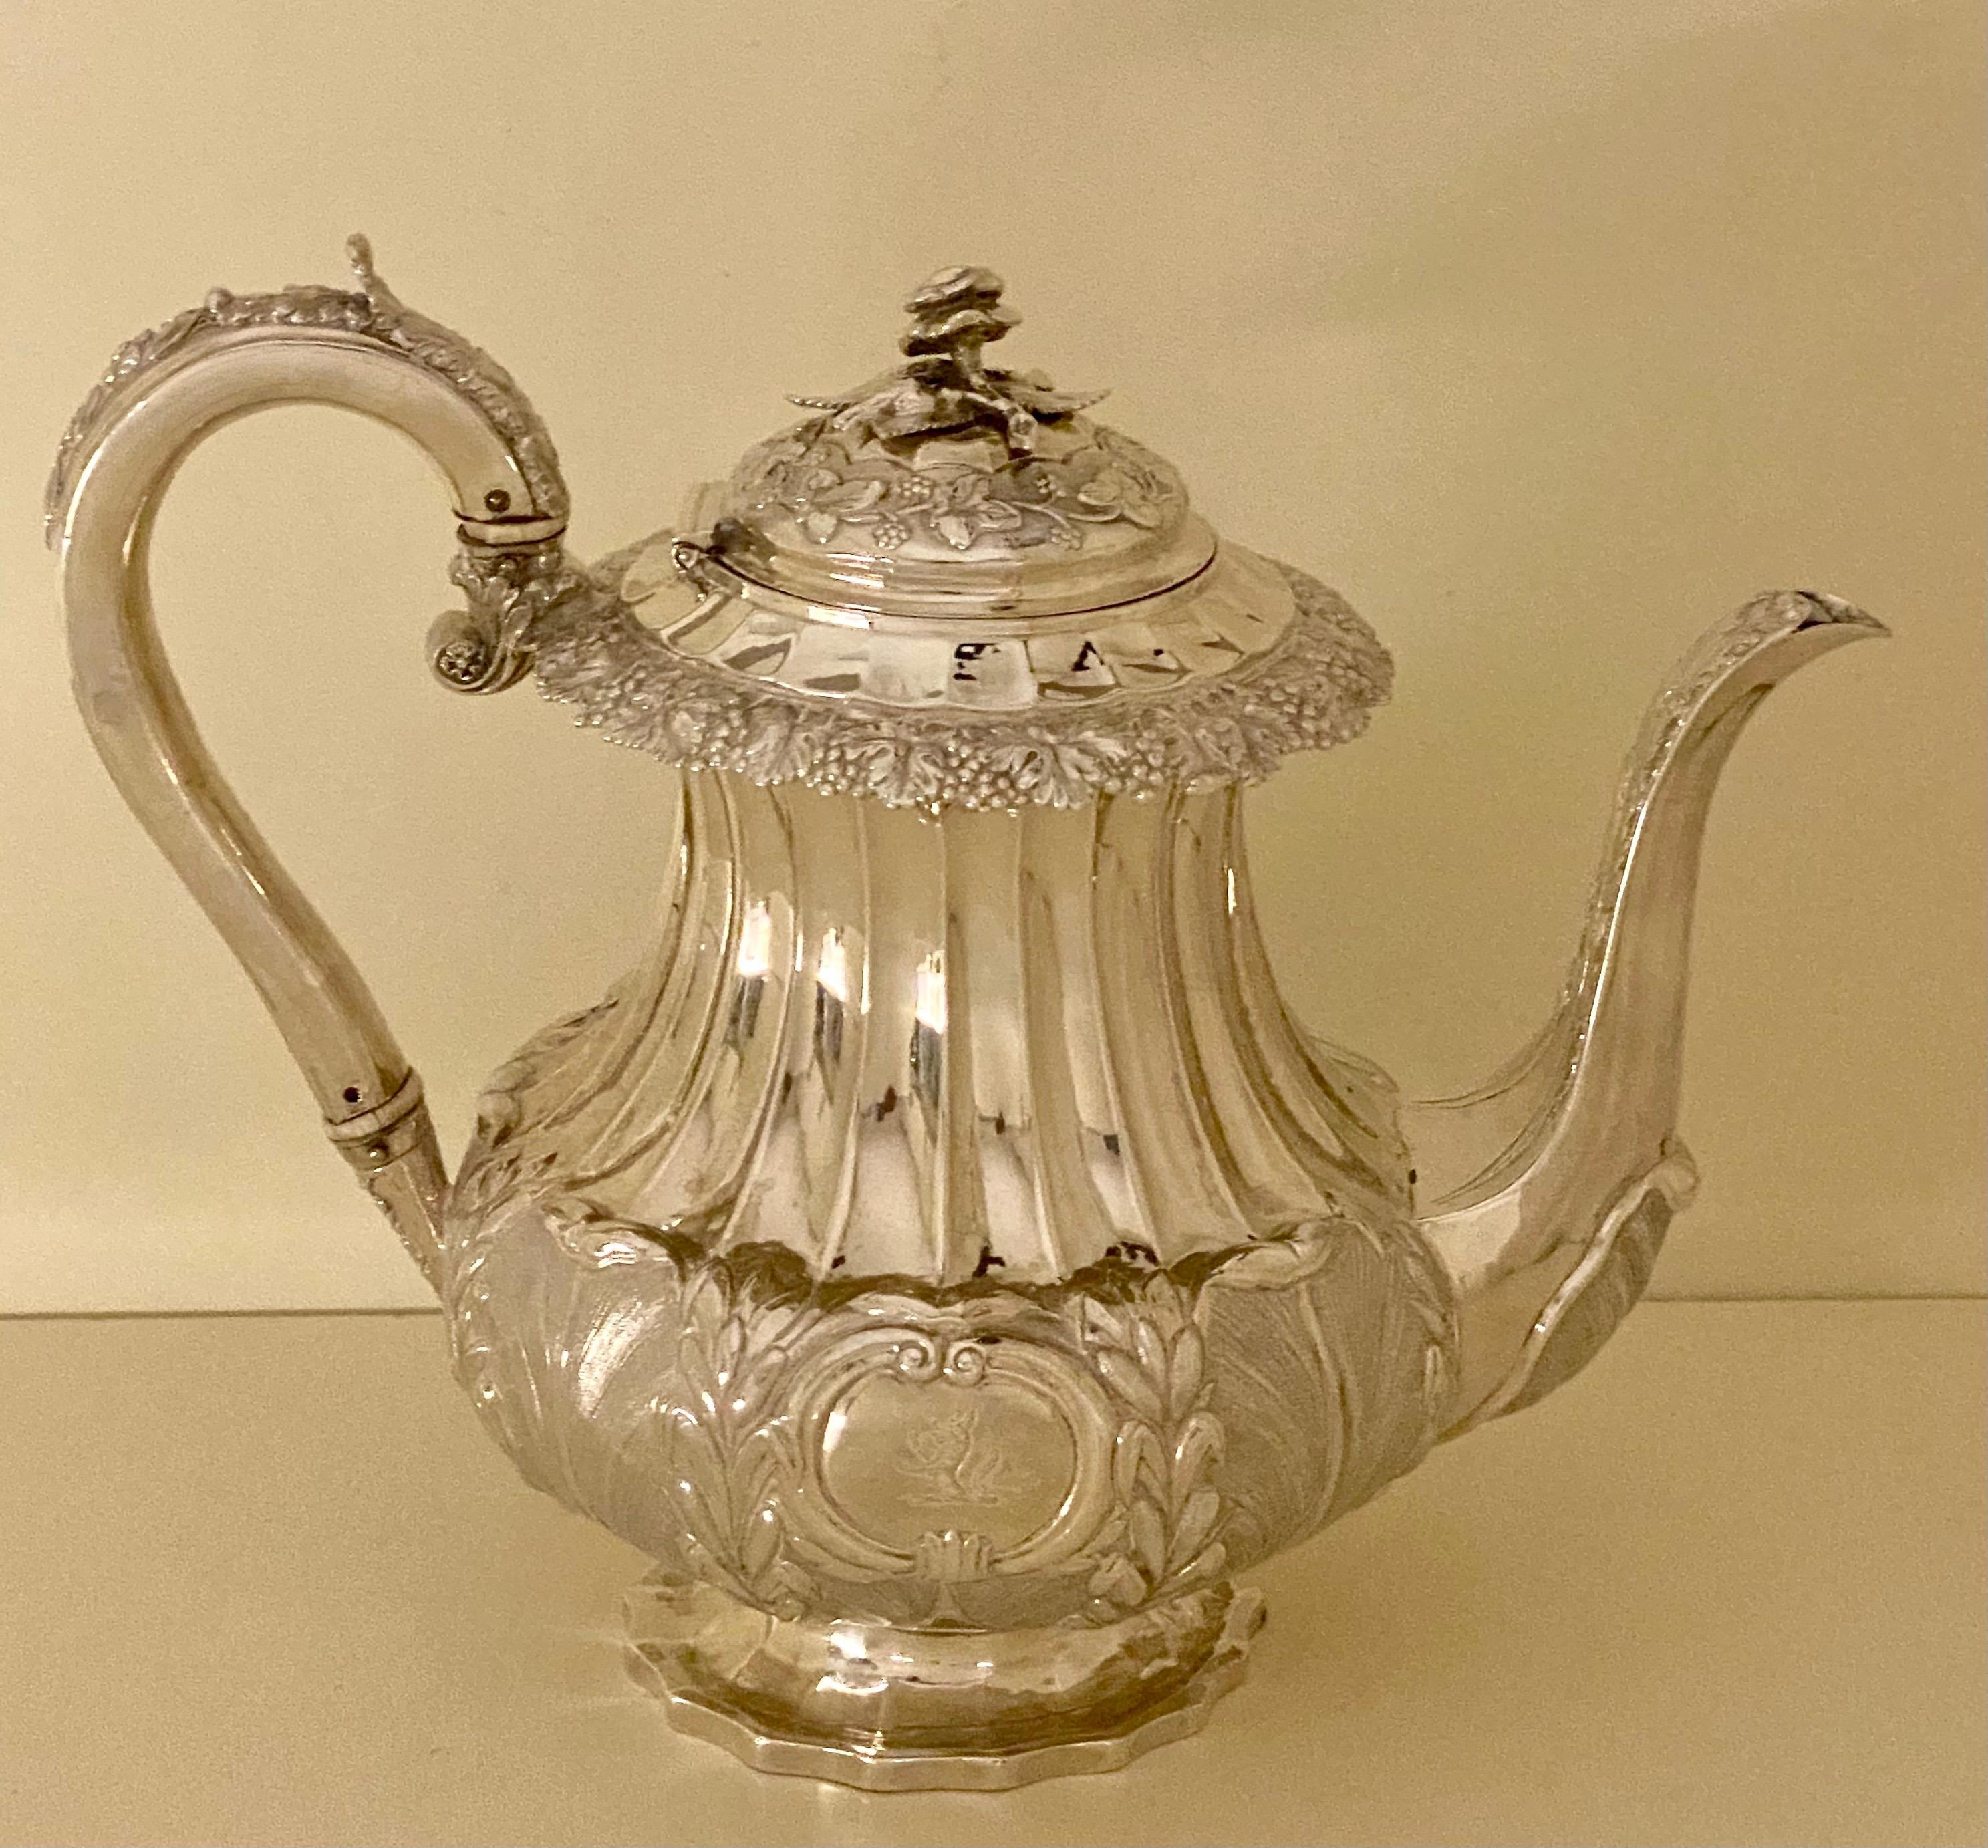 Antique William IV sterling silver teapot in superb condition with Superb quality decoration throughout.
It has a capacity of 3 pints and measures 9.5” (24 cms) tall to the top of the finial x 11 1/2” (29 cms) across from the handle to the end of